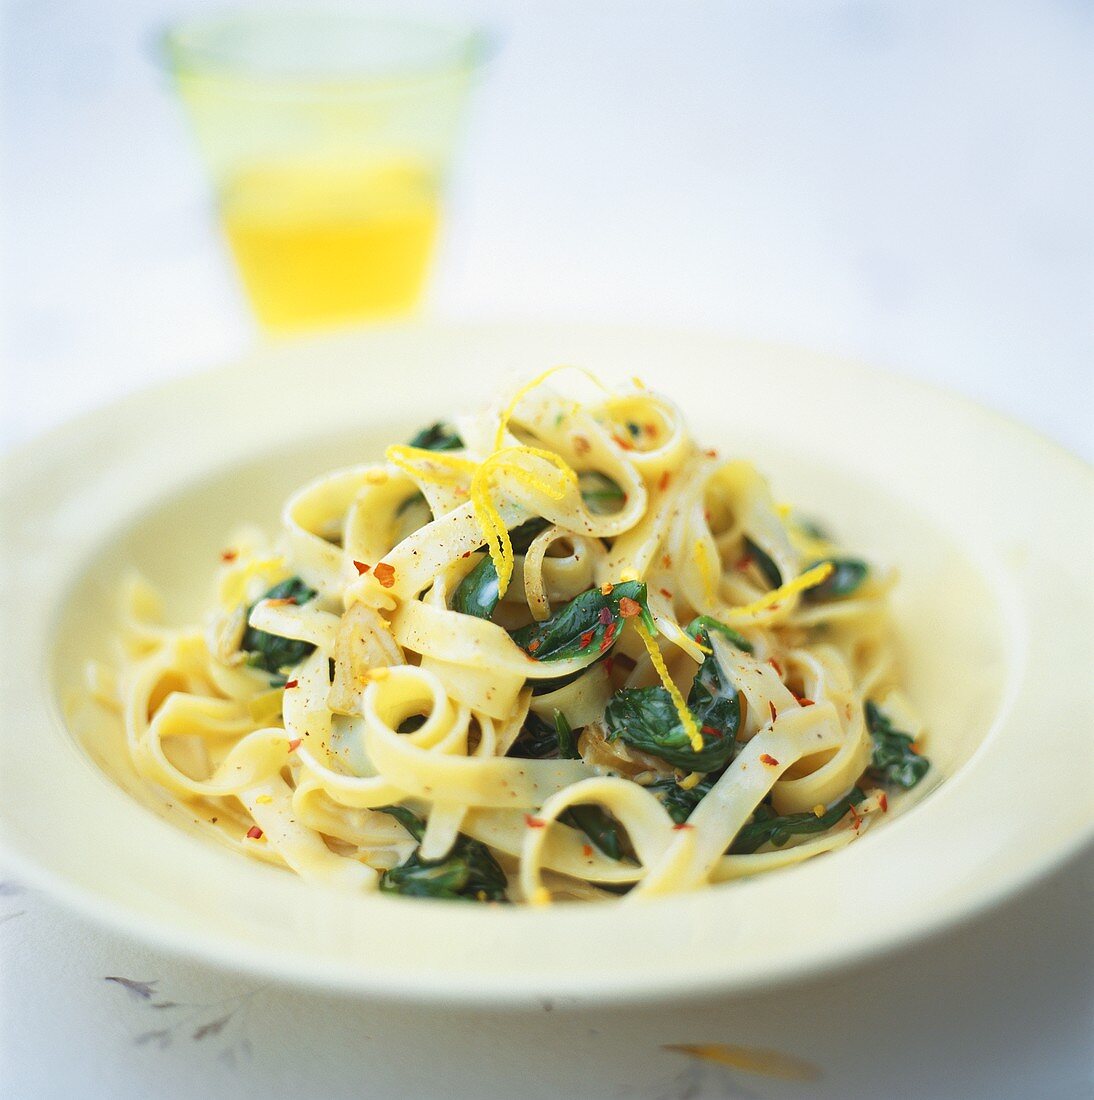 Tagliatelle with spinach and chili and lime sauce